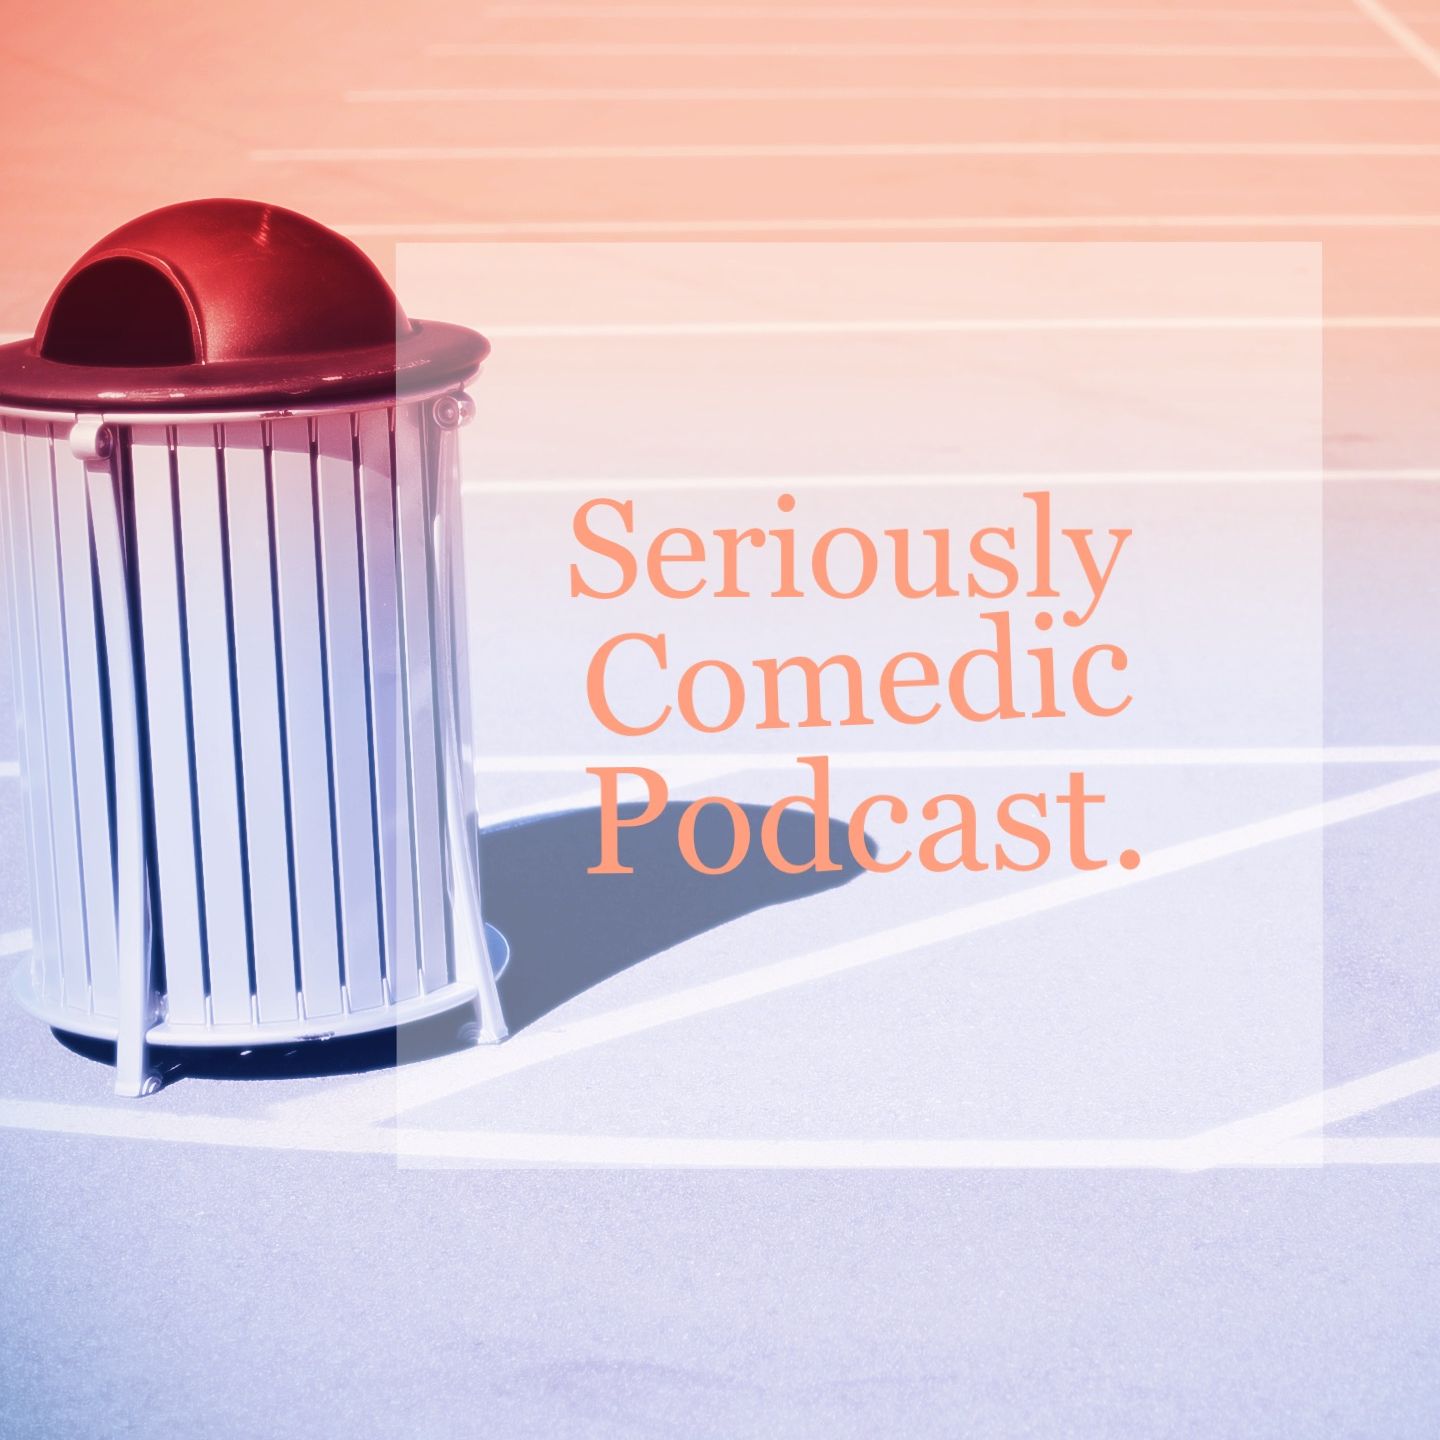 Seriously Comedic Podcast